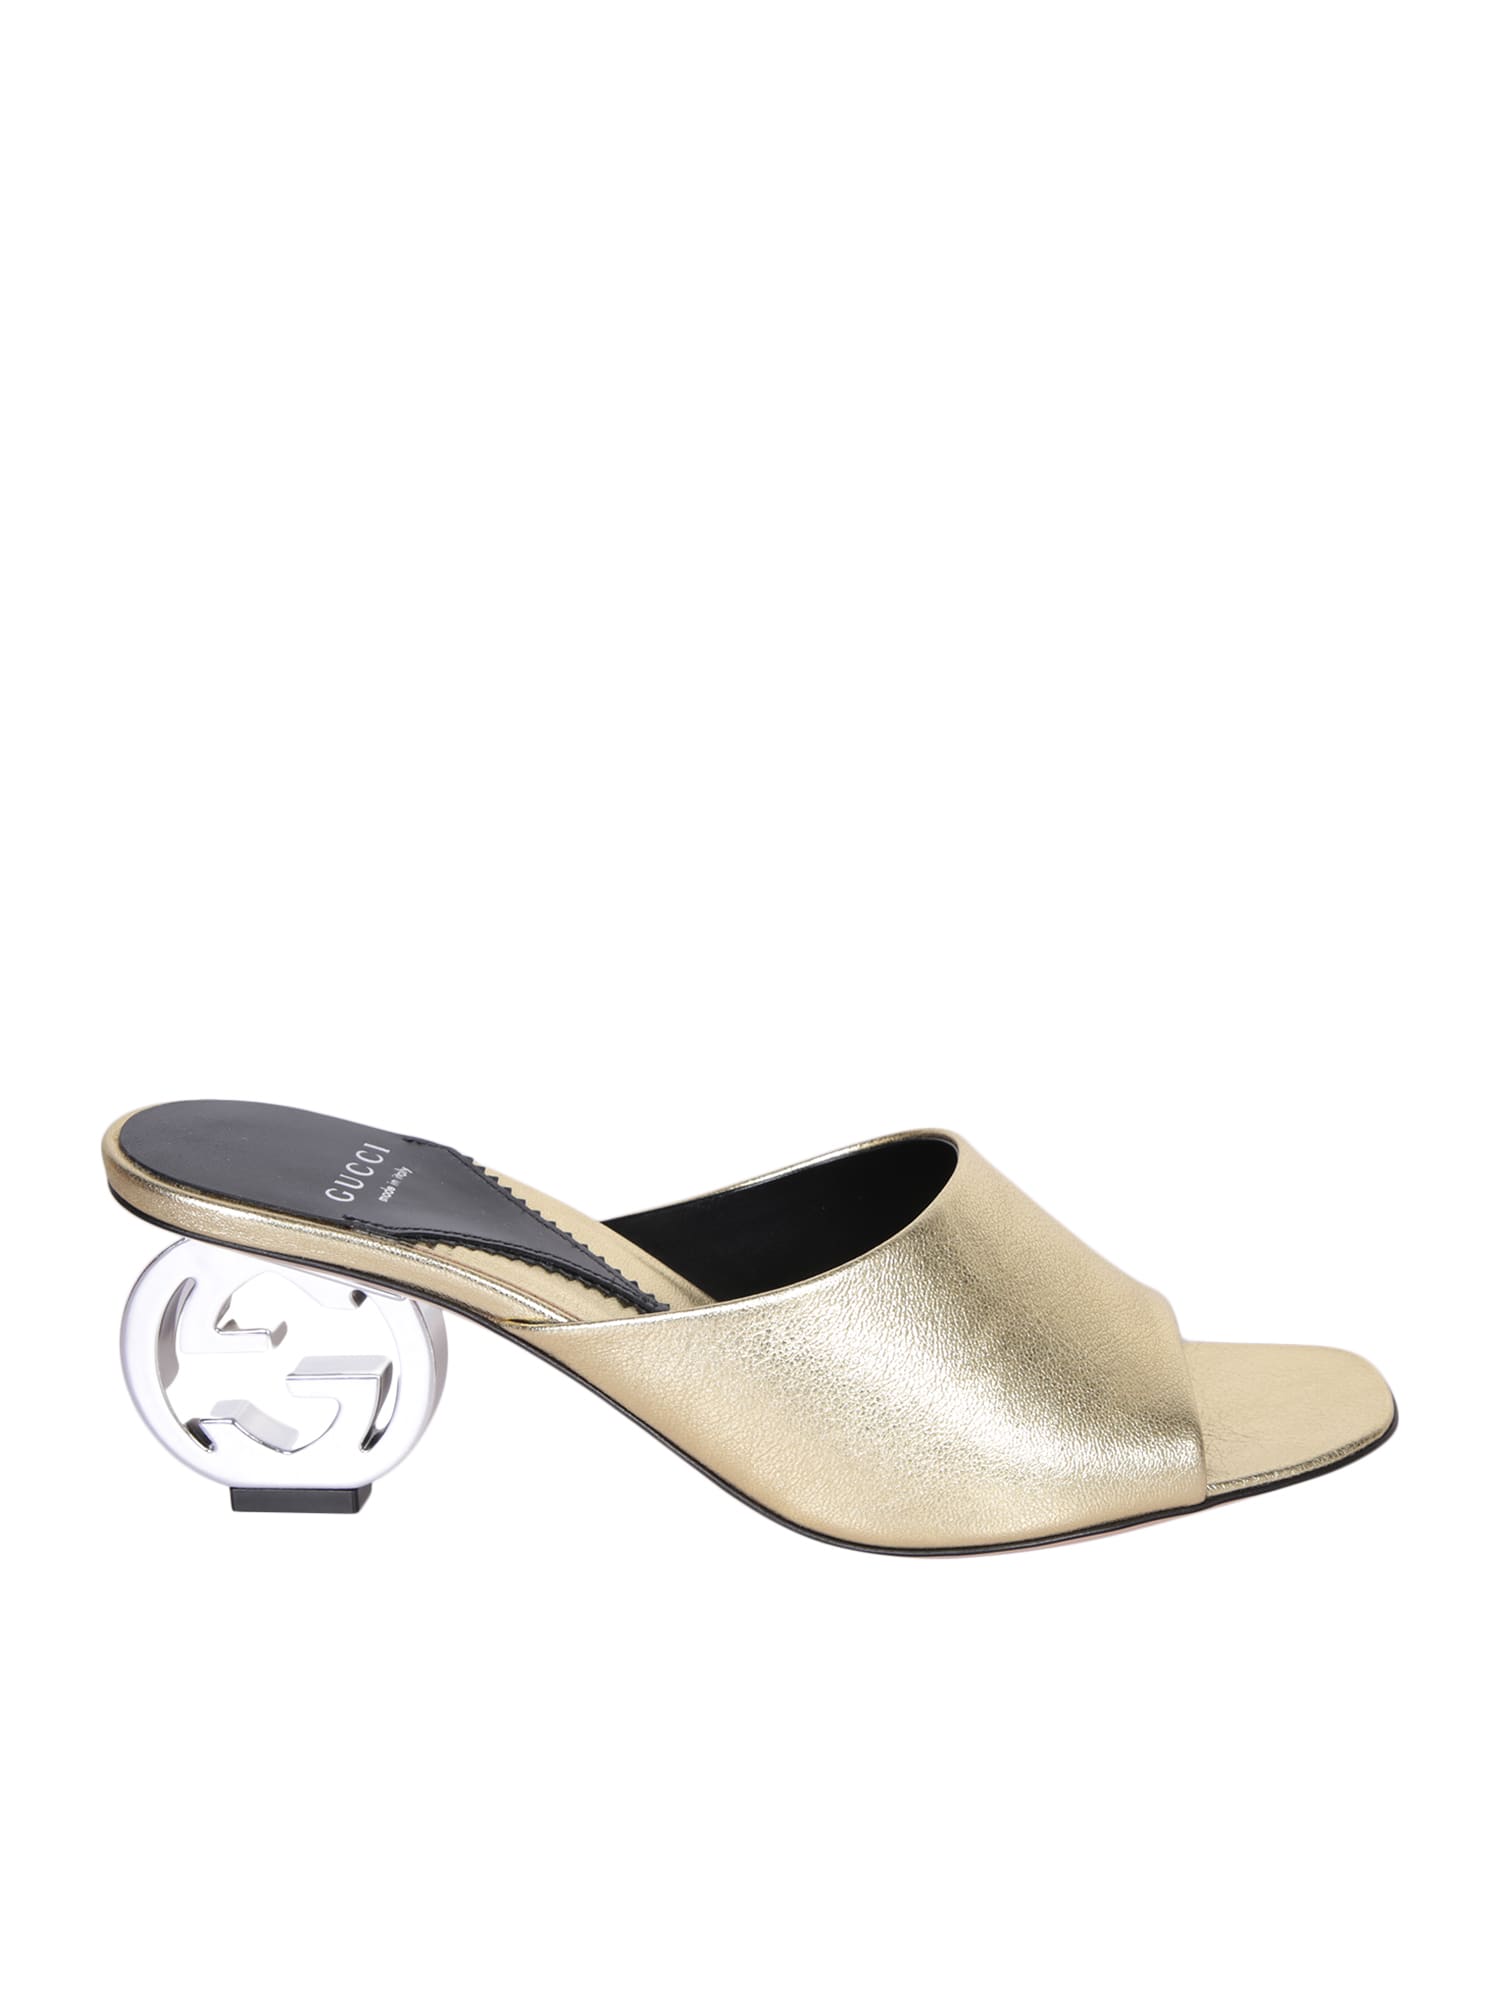 Gg Heeled Mules Sandals By Gucci